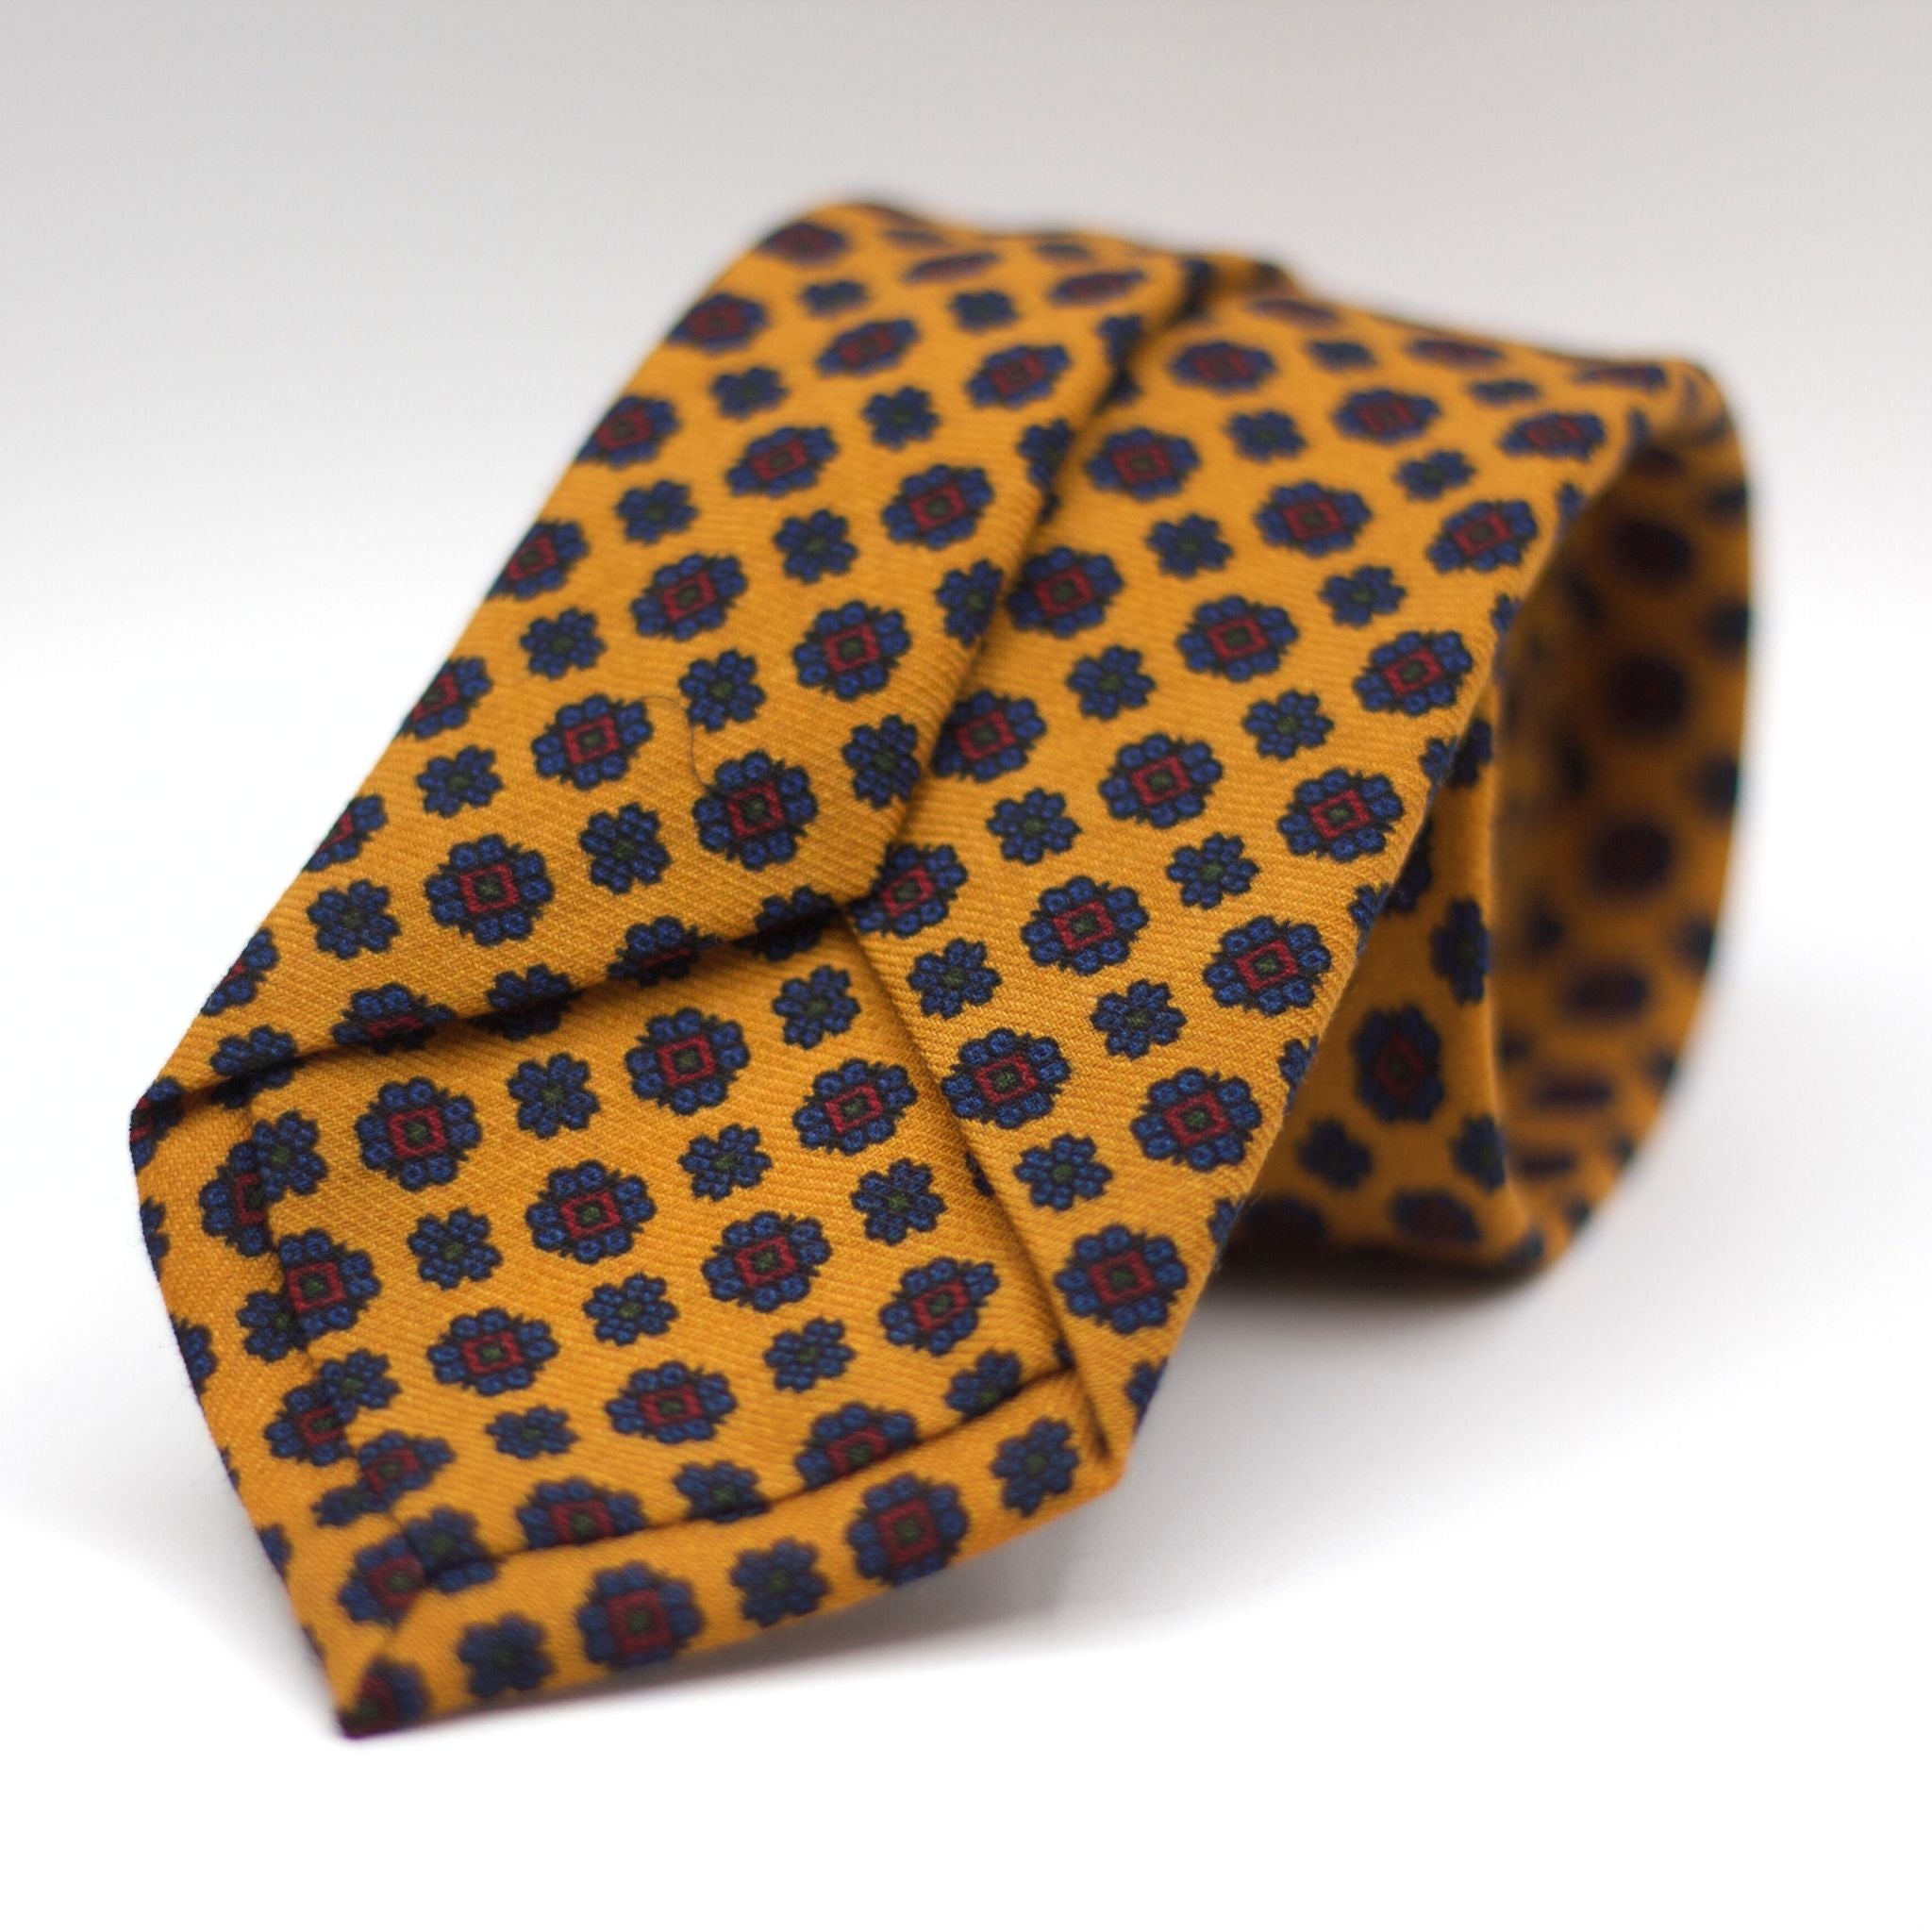 Holliday & Brown for Cruciani & Bella 100% Printed Wool  Tipped Orange, Blue and Burgundy Motif Tie Handmade in Italy 8 cm x 148 cm